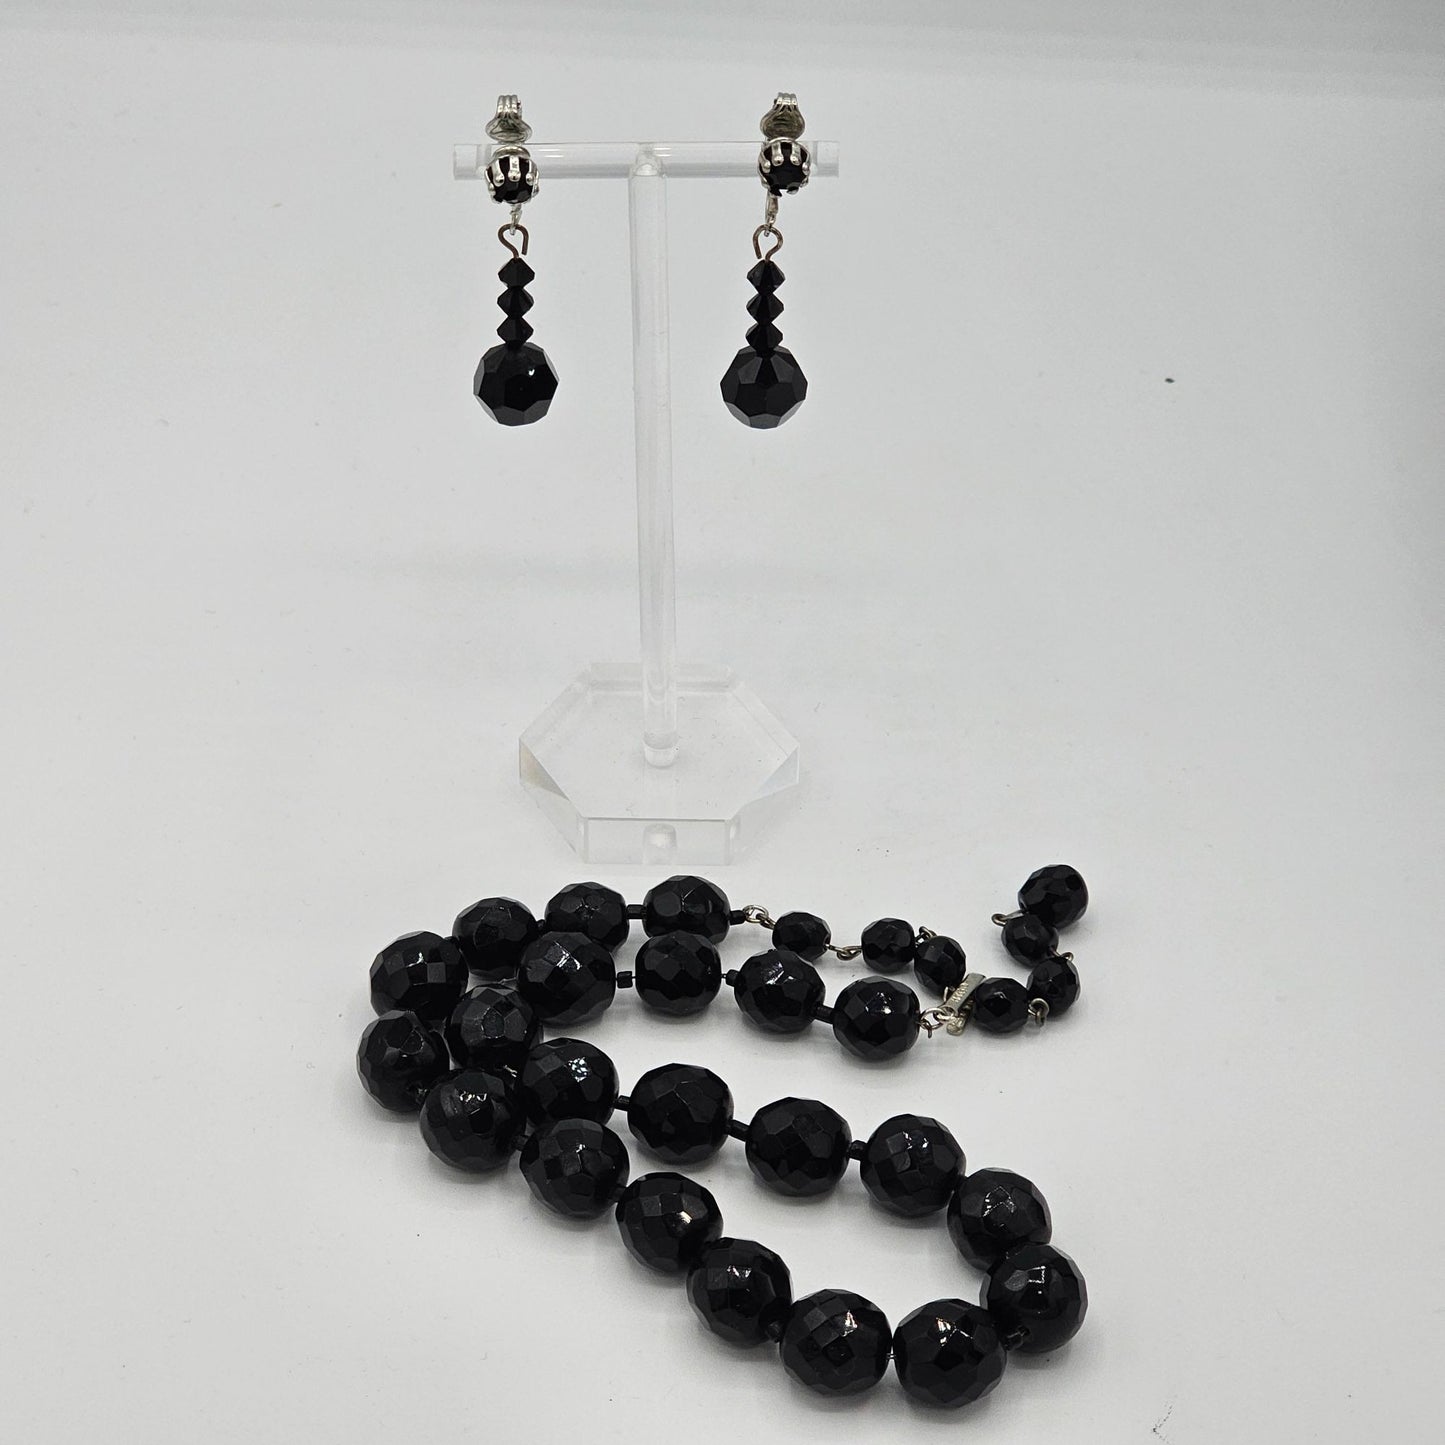 Hobe Vintage Black Fauceted Glass Beaded Mourning Necklace Dangle Earrings Set